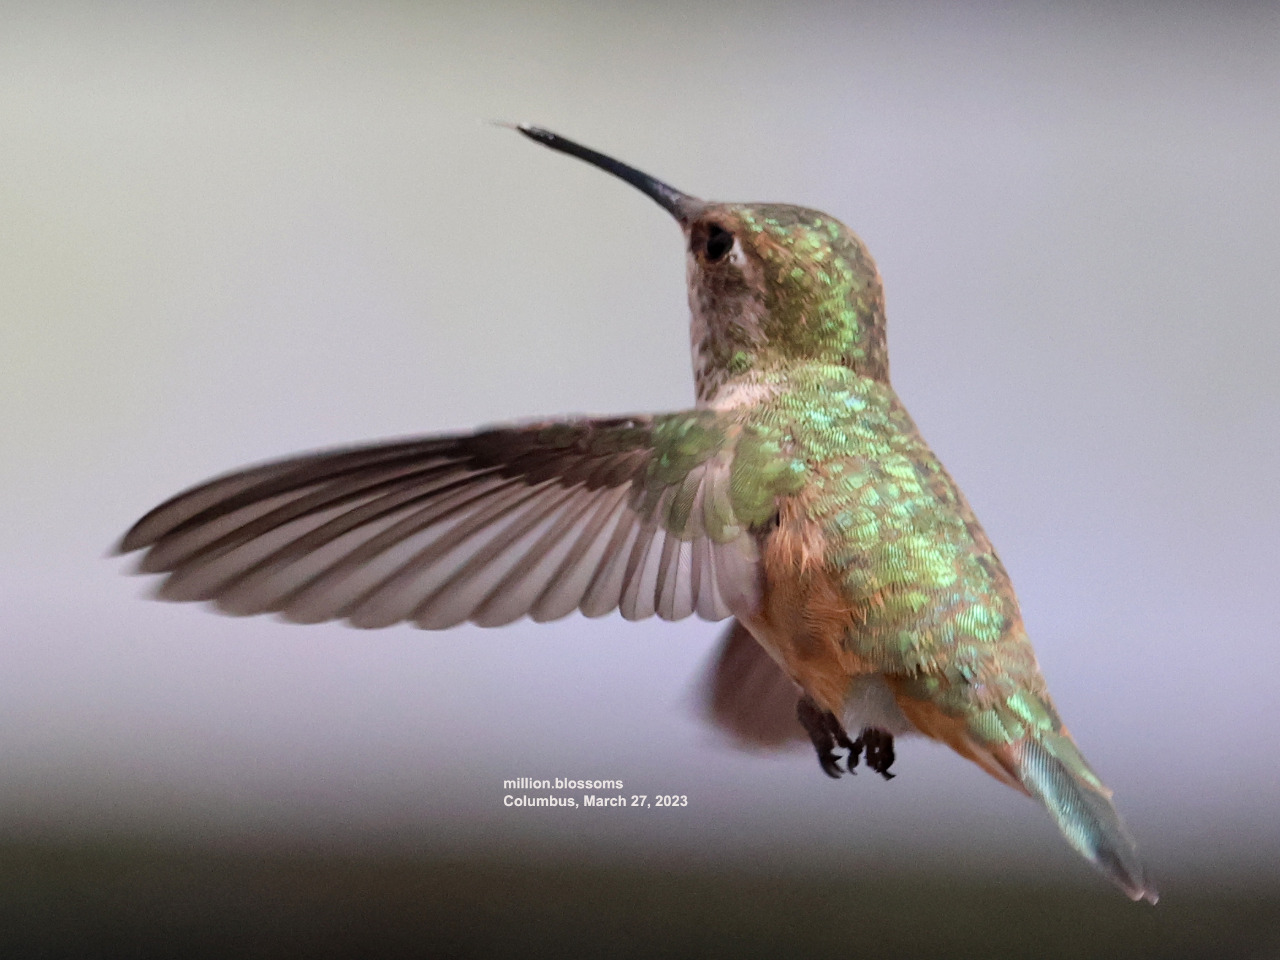 Columbus the Hummingbird flying with new feathers